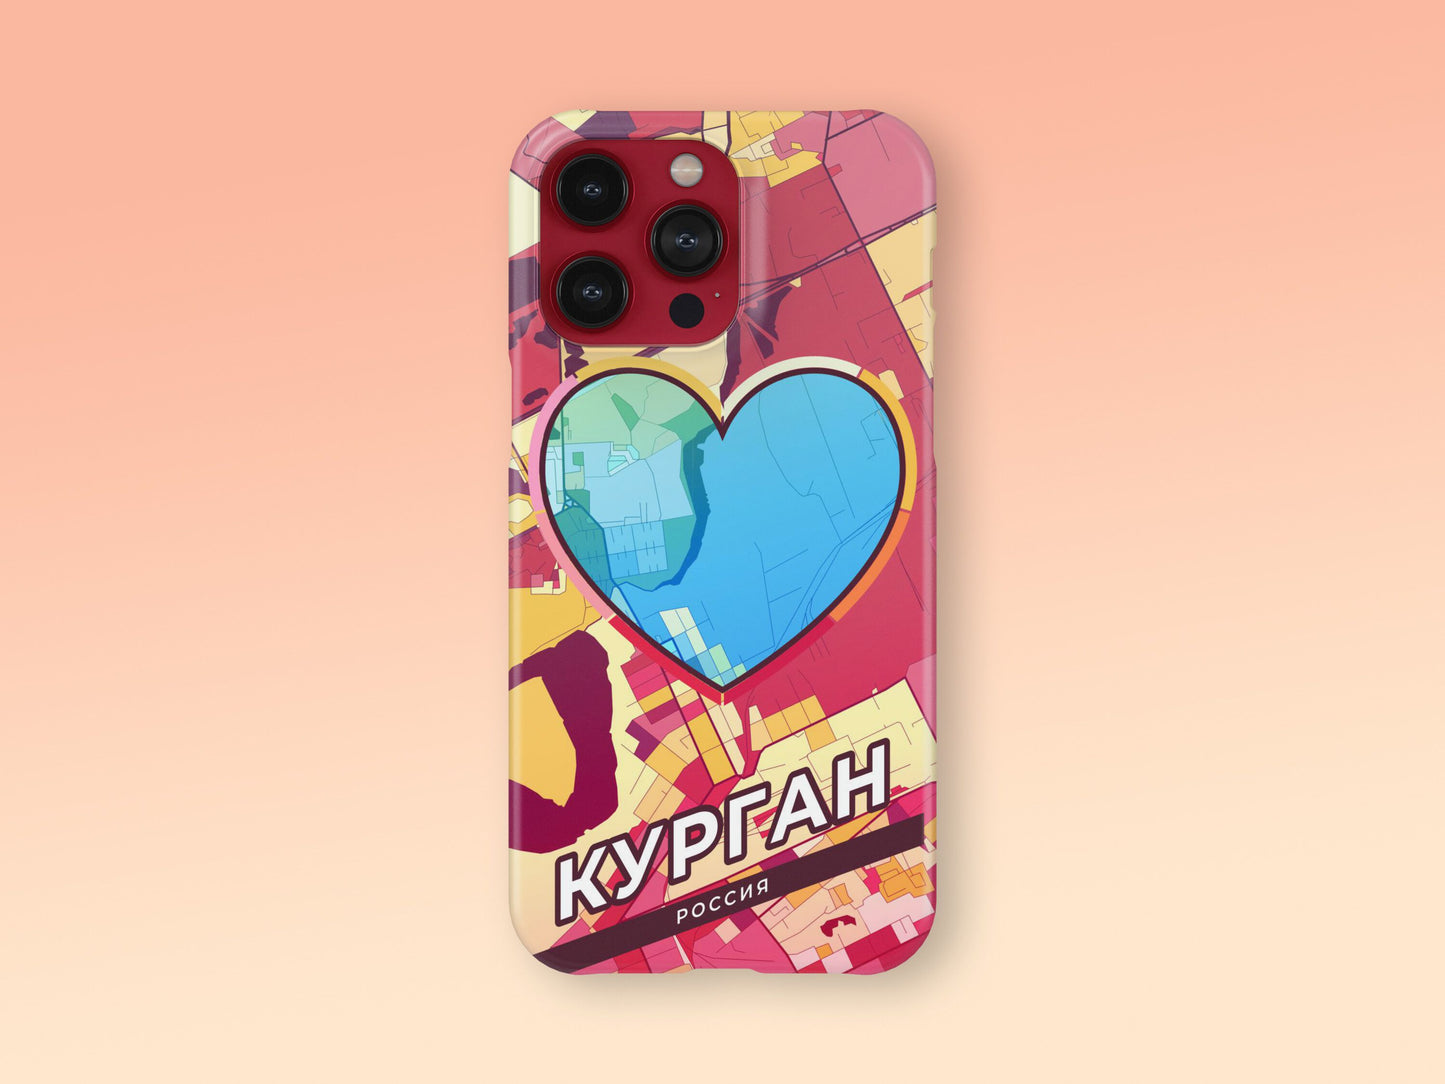 Kurgan Russia slim phone case with colorful icon. Birthday, wedding or housewarming gift. Couple match cases. 2